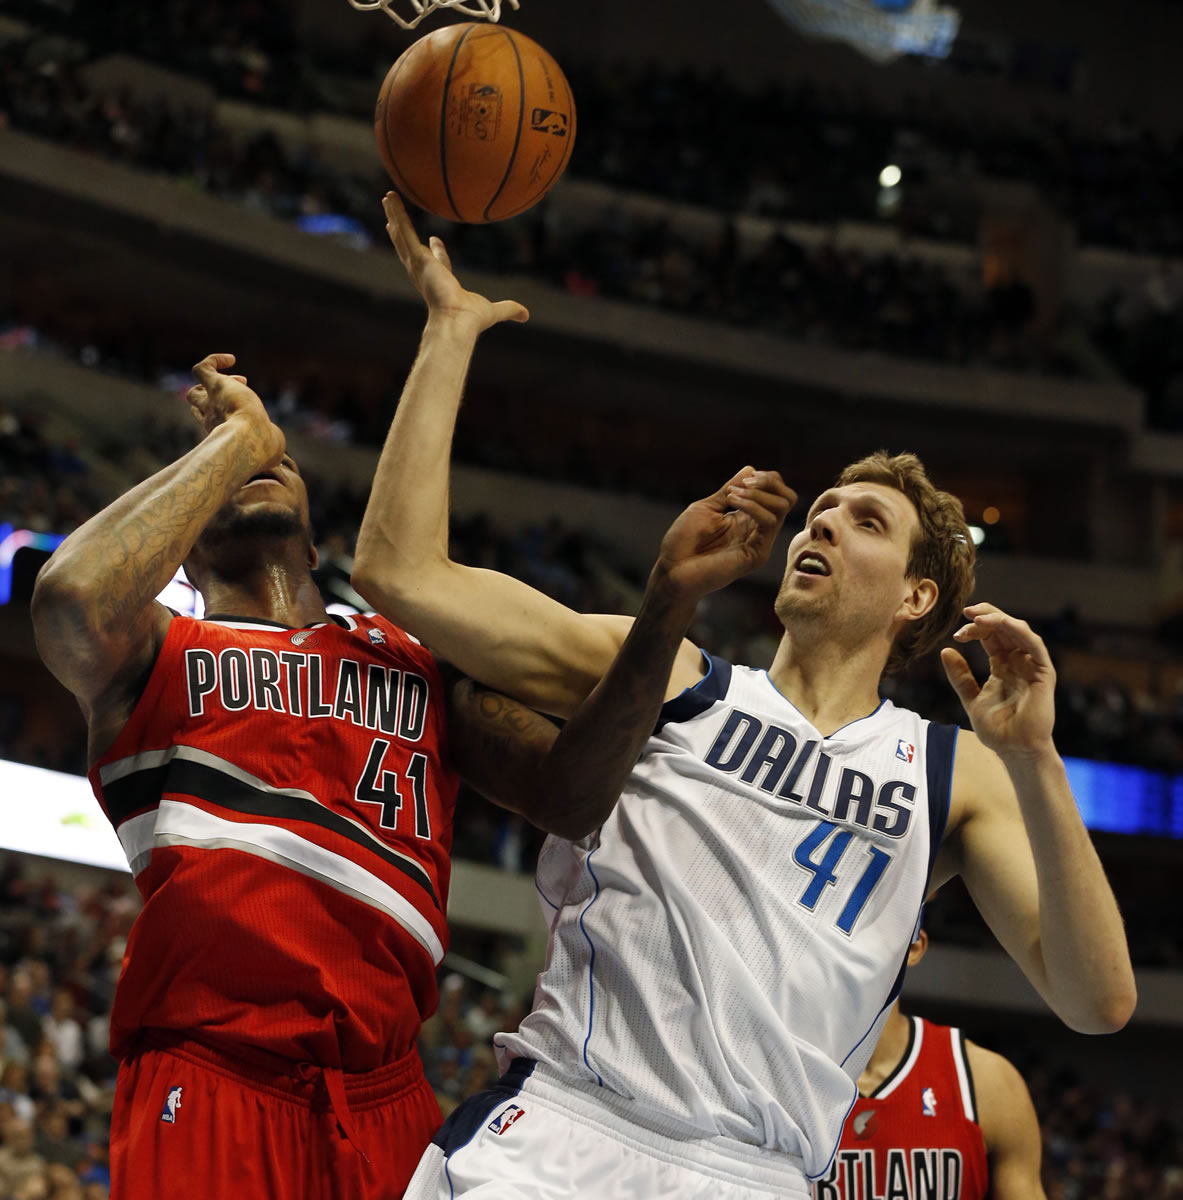 Portland Trail Blazers forward Thomas Robinson, left, and Dallas Mavericks forward Dirk Nowitzki, right, of Germany, fight for a loose ball during the first half of an NBA basketball game on Friday, March 7, 2014, in Dallas. (AP Photo/John F.